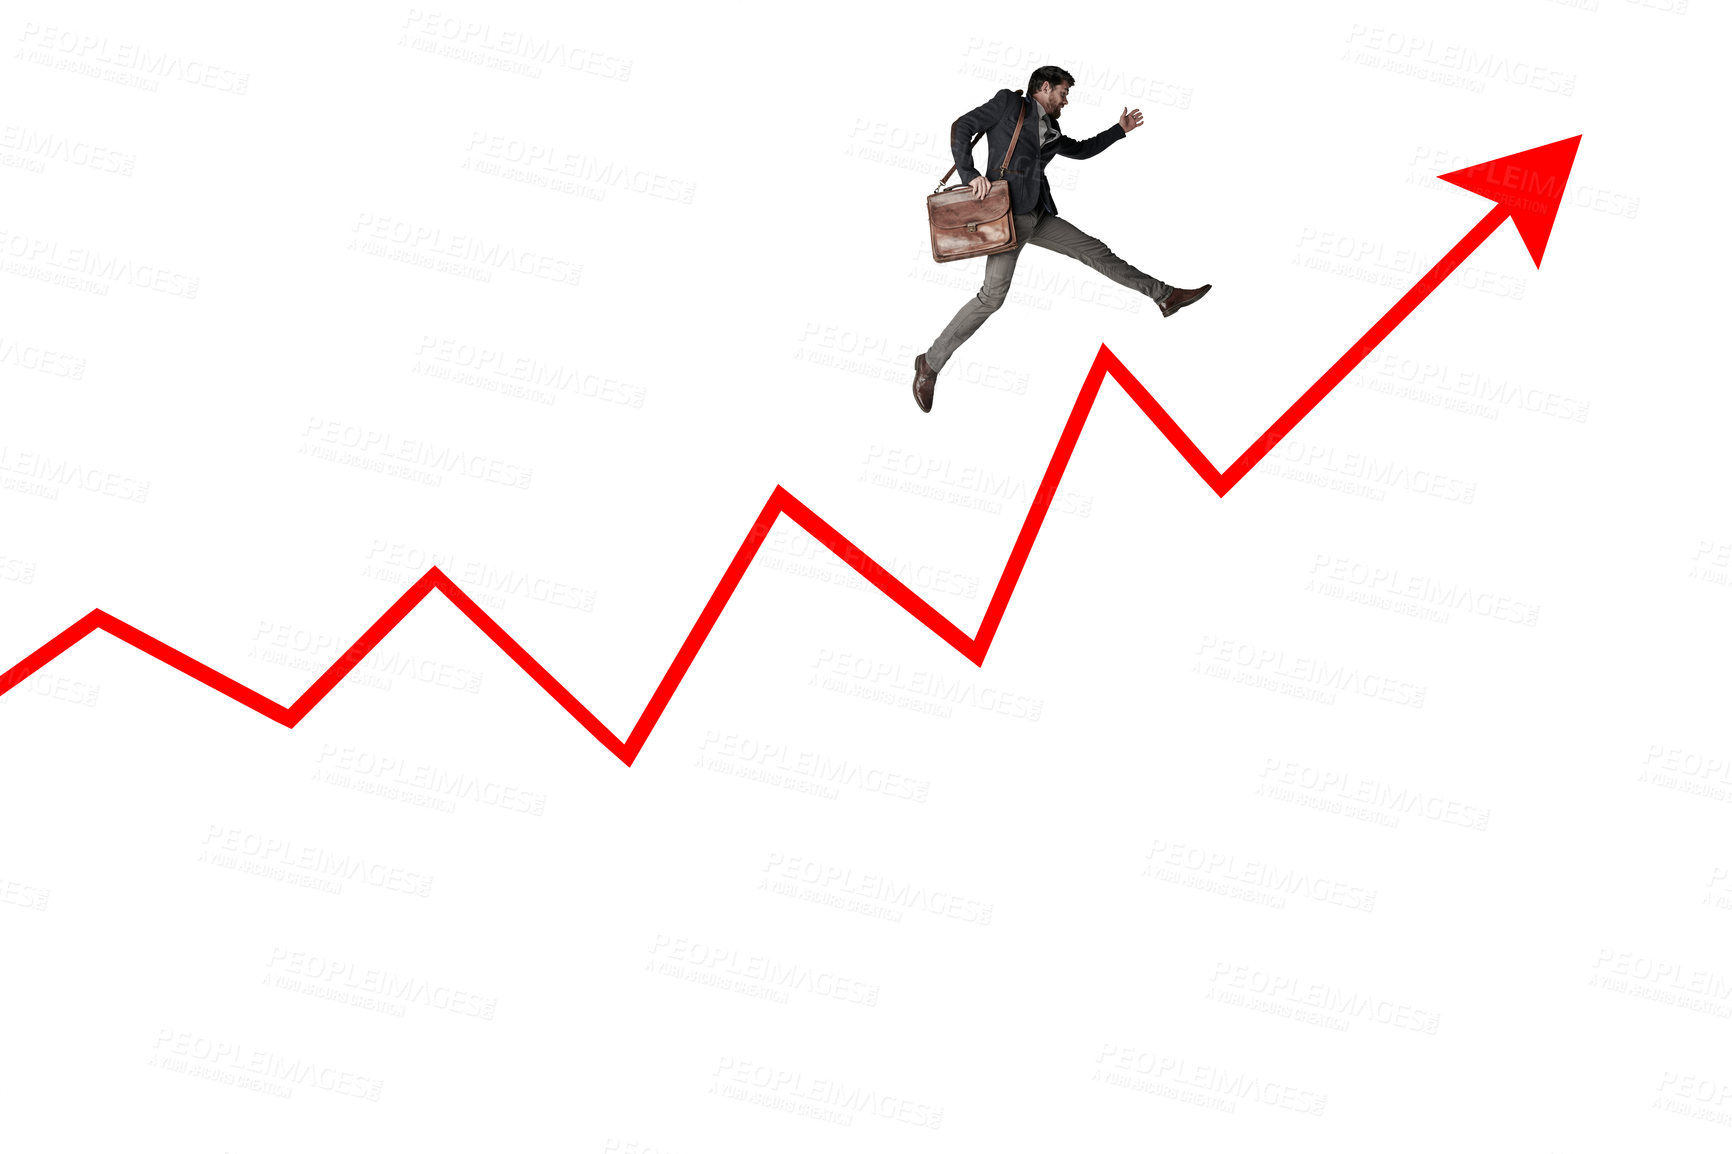 Buy stock photo Shot of a businessman carrying a bag and running above a graph against a white background